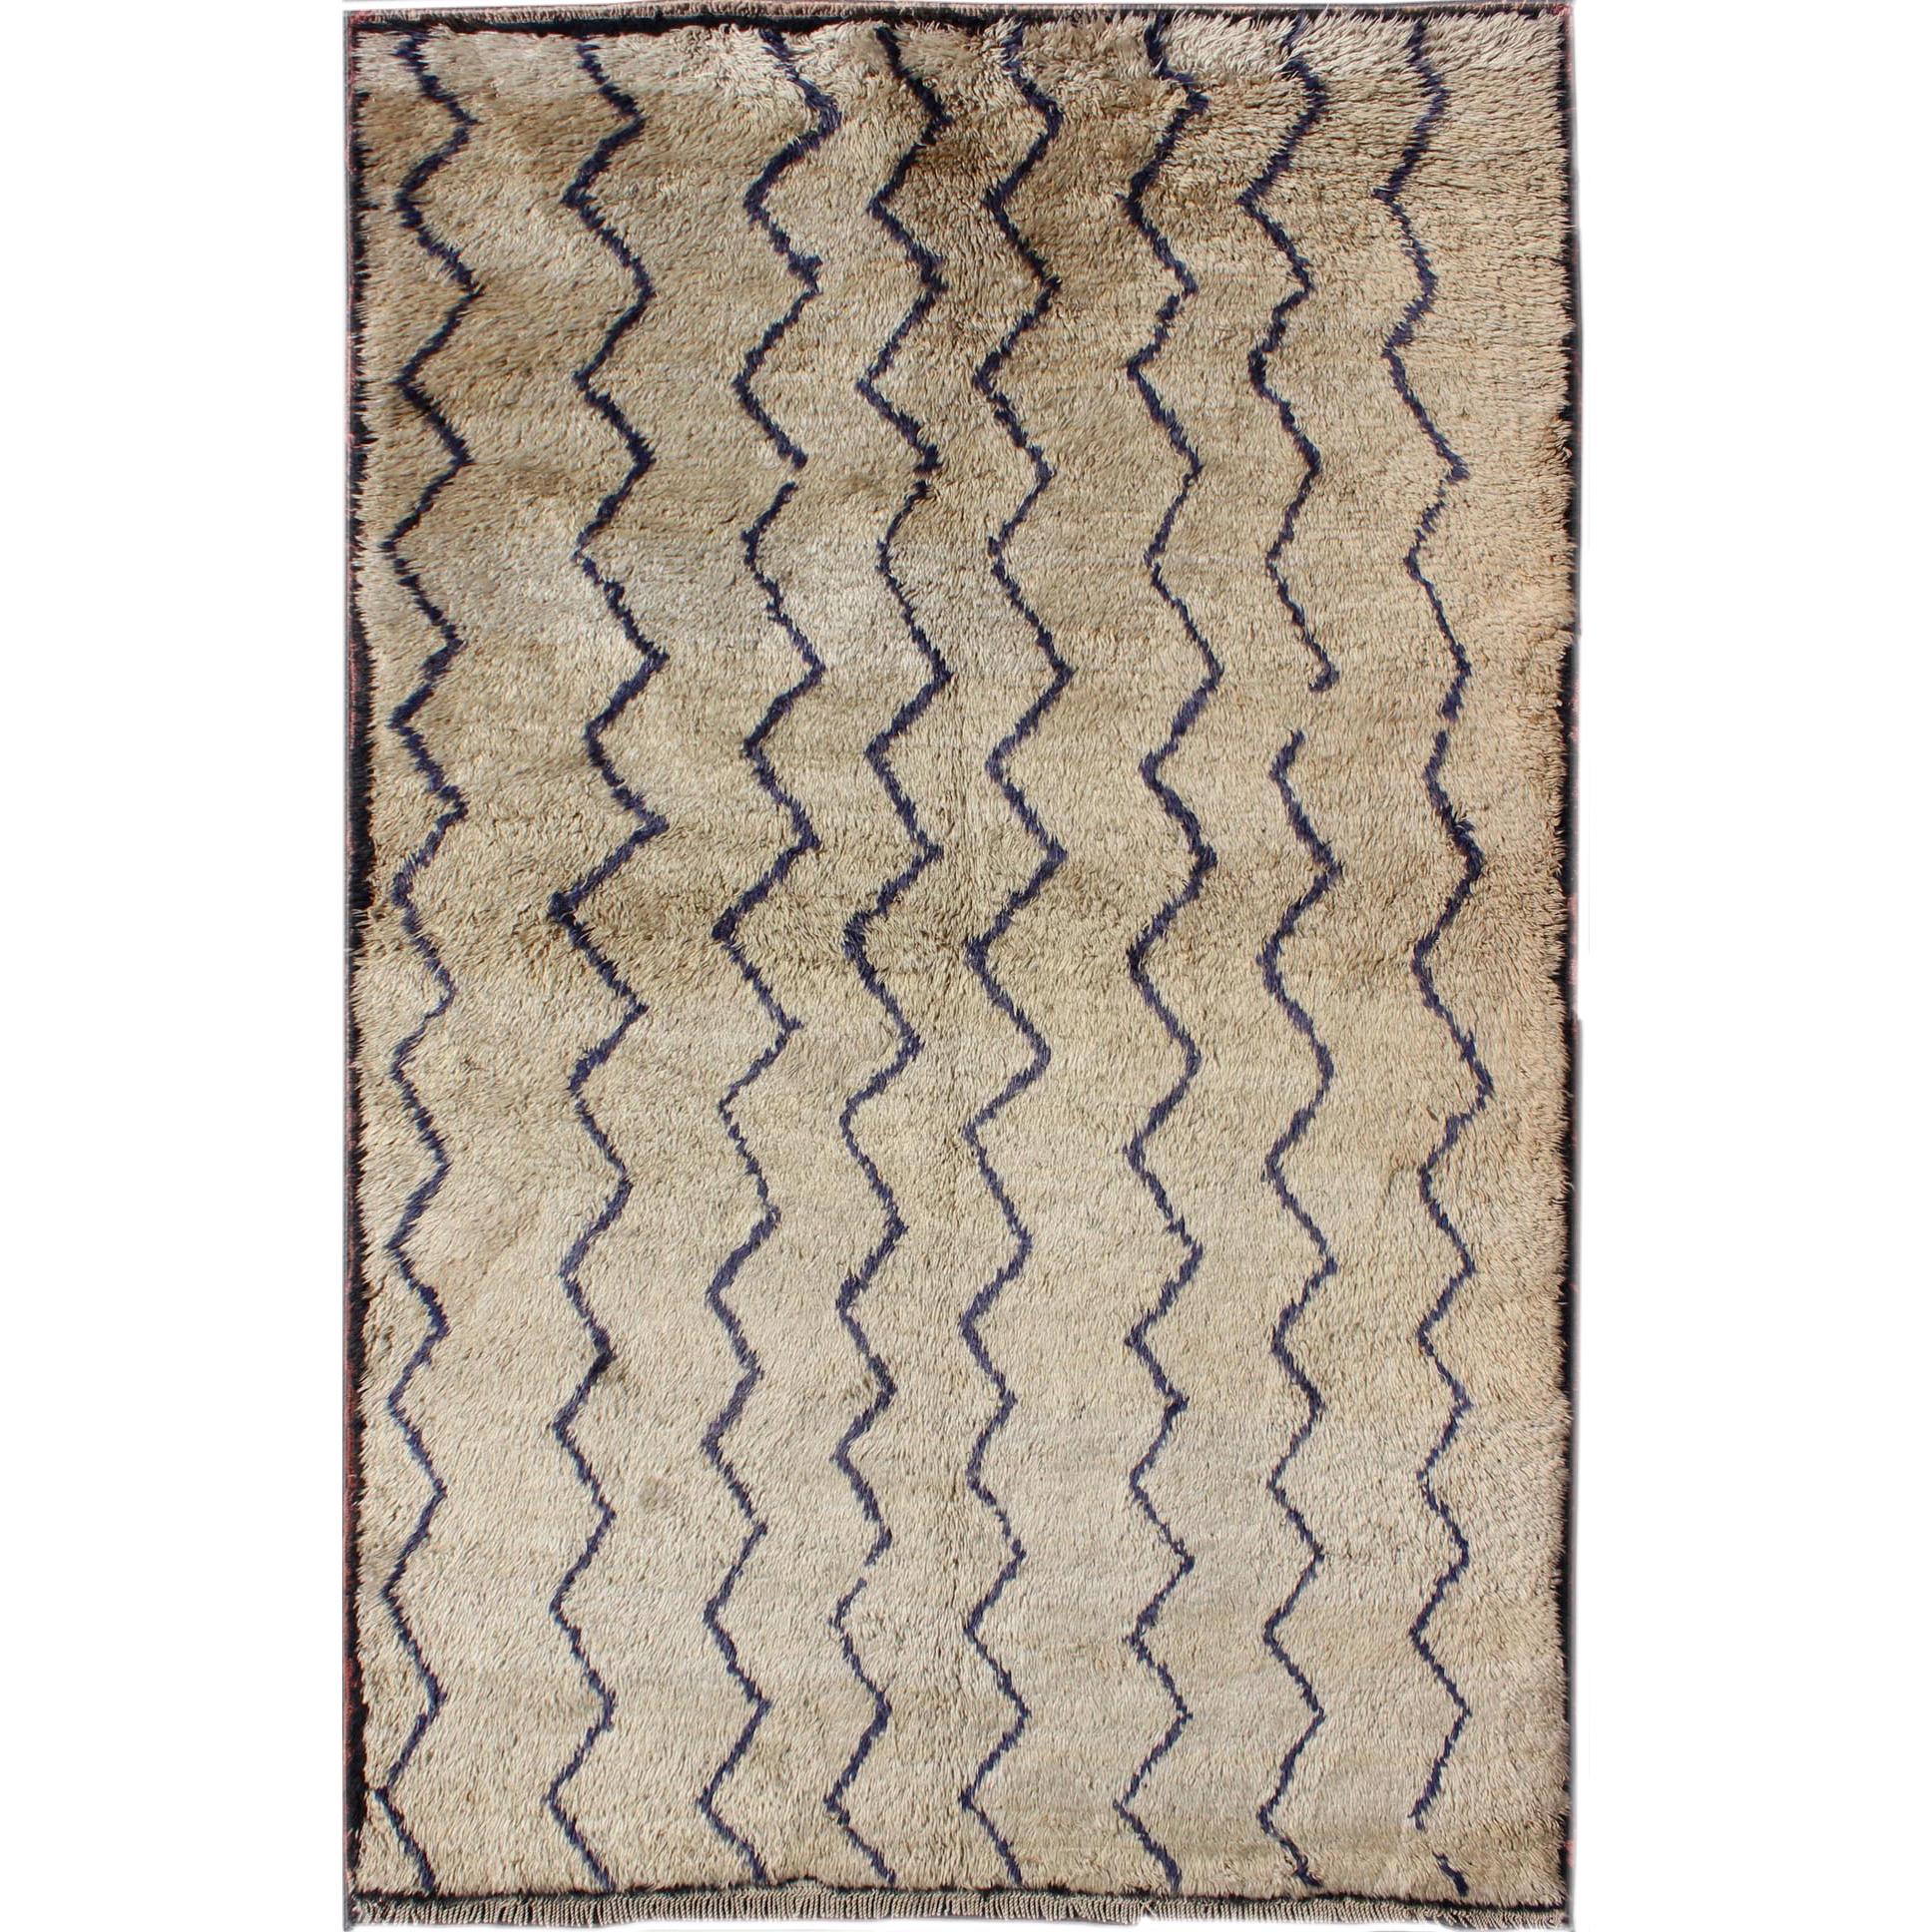 Vintage Tulu Rug With Modern Design in Off Taupe Color and Dark Blue Lines For Sale